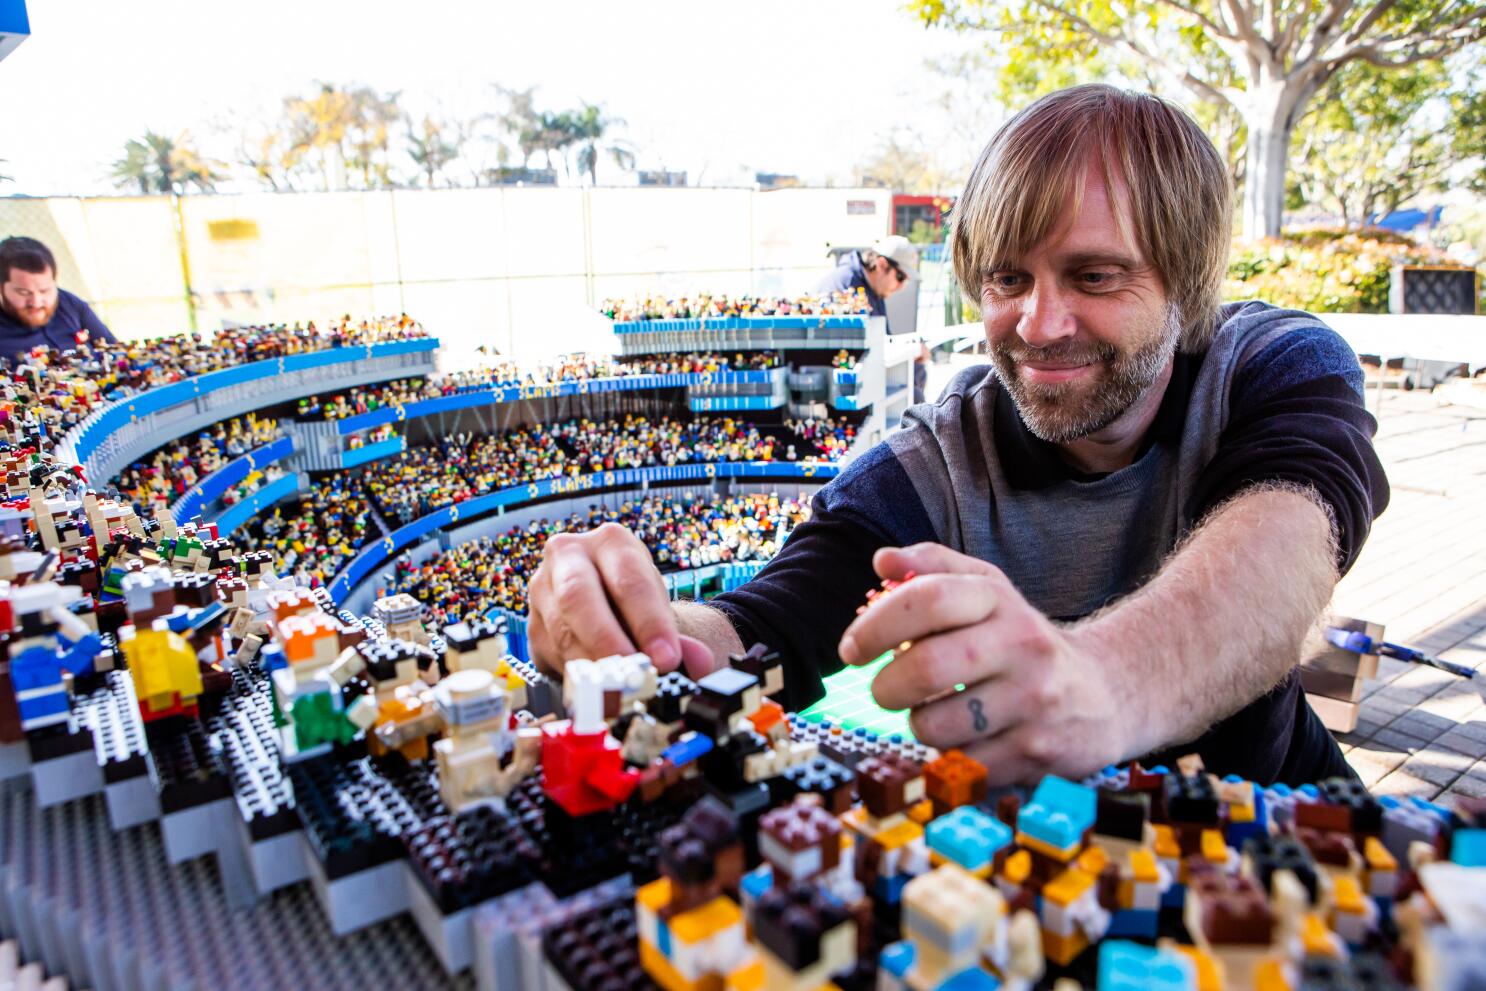 The world of Lego,as exciting as ever